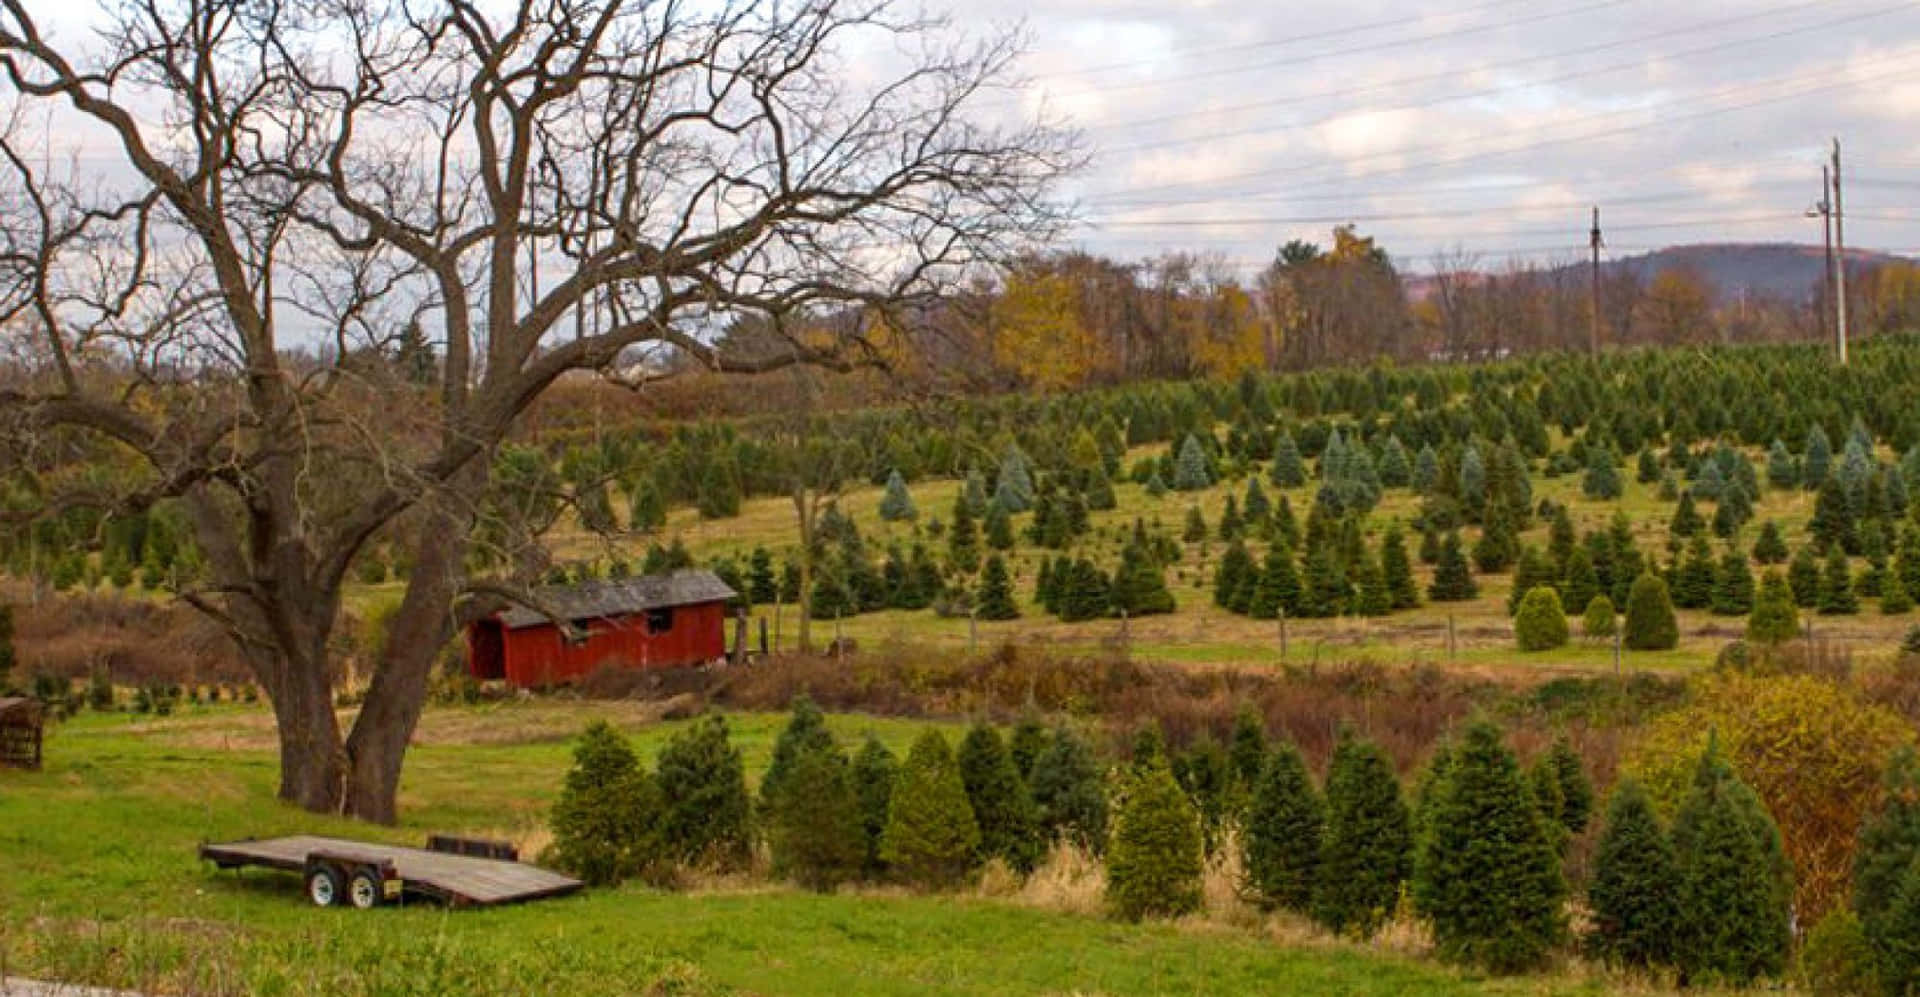 Leafless Tree In Christmas Tree Farm Picture